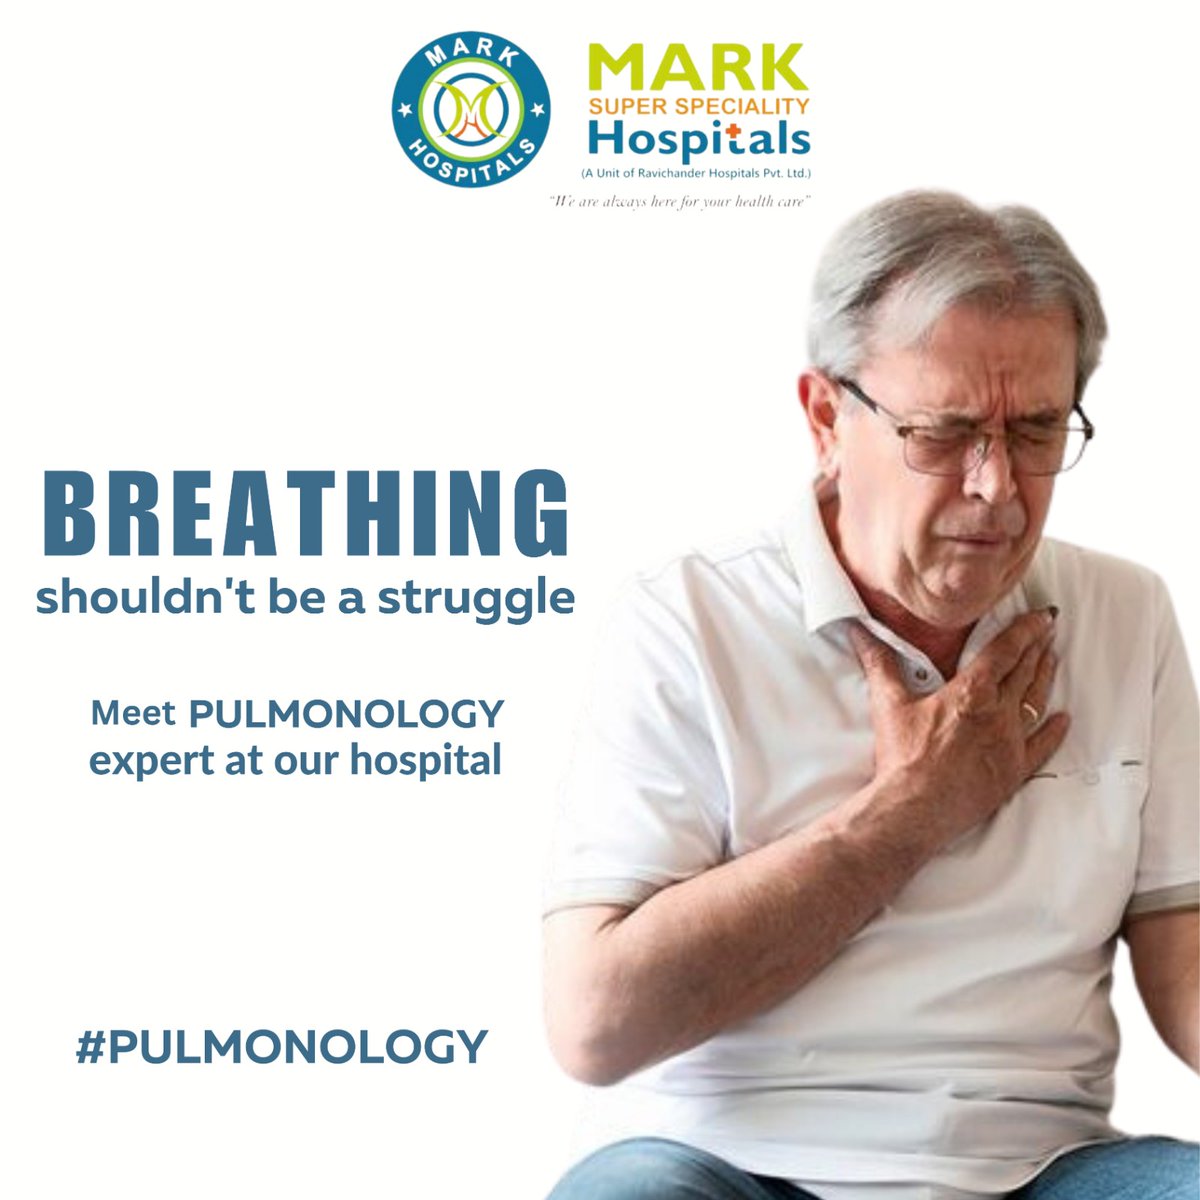 Breathe easier and take control of your respiratory health with Mark Super Specialty Hospital! 🏥💨

#MarkSuperSpecialtyHospital #PulmonologyExpert #RespiratoryWellness #ComprehensiveCare #ExpertiseInLungHealth #BreatheEasier #RespiratoryConditions #HealthAndWellness #Breath